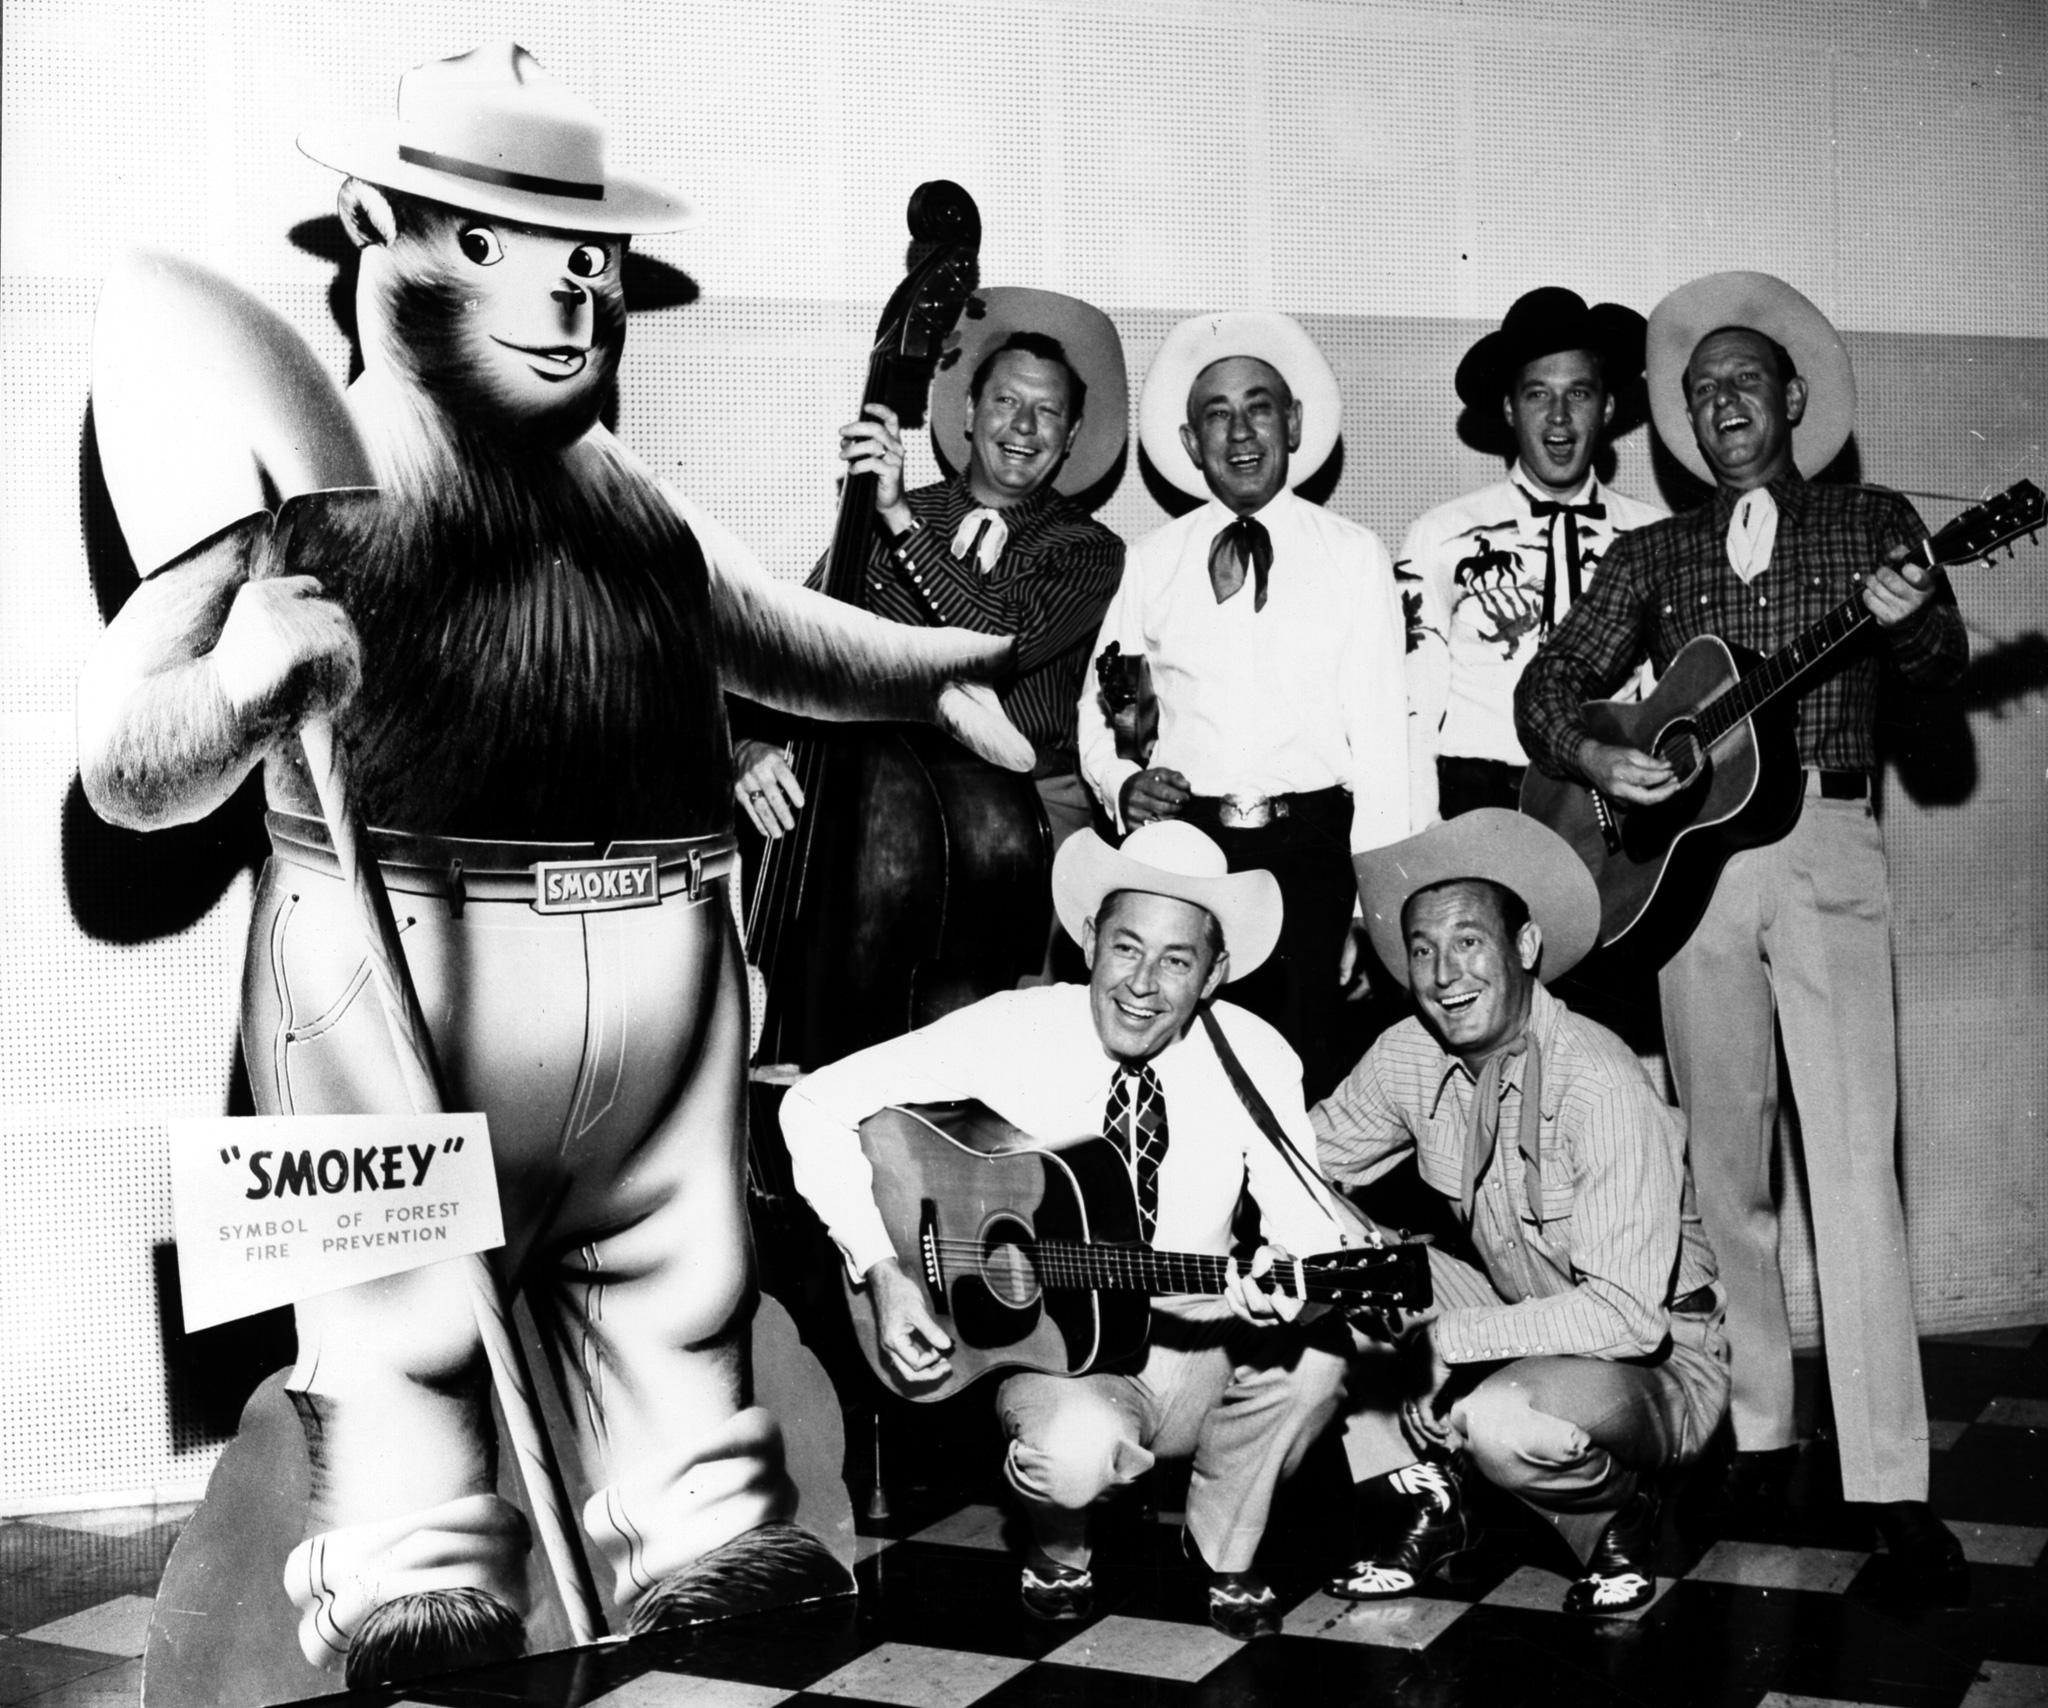 Smokey Bear posing with a group of musicians in the 1950's.